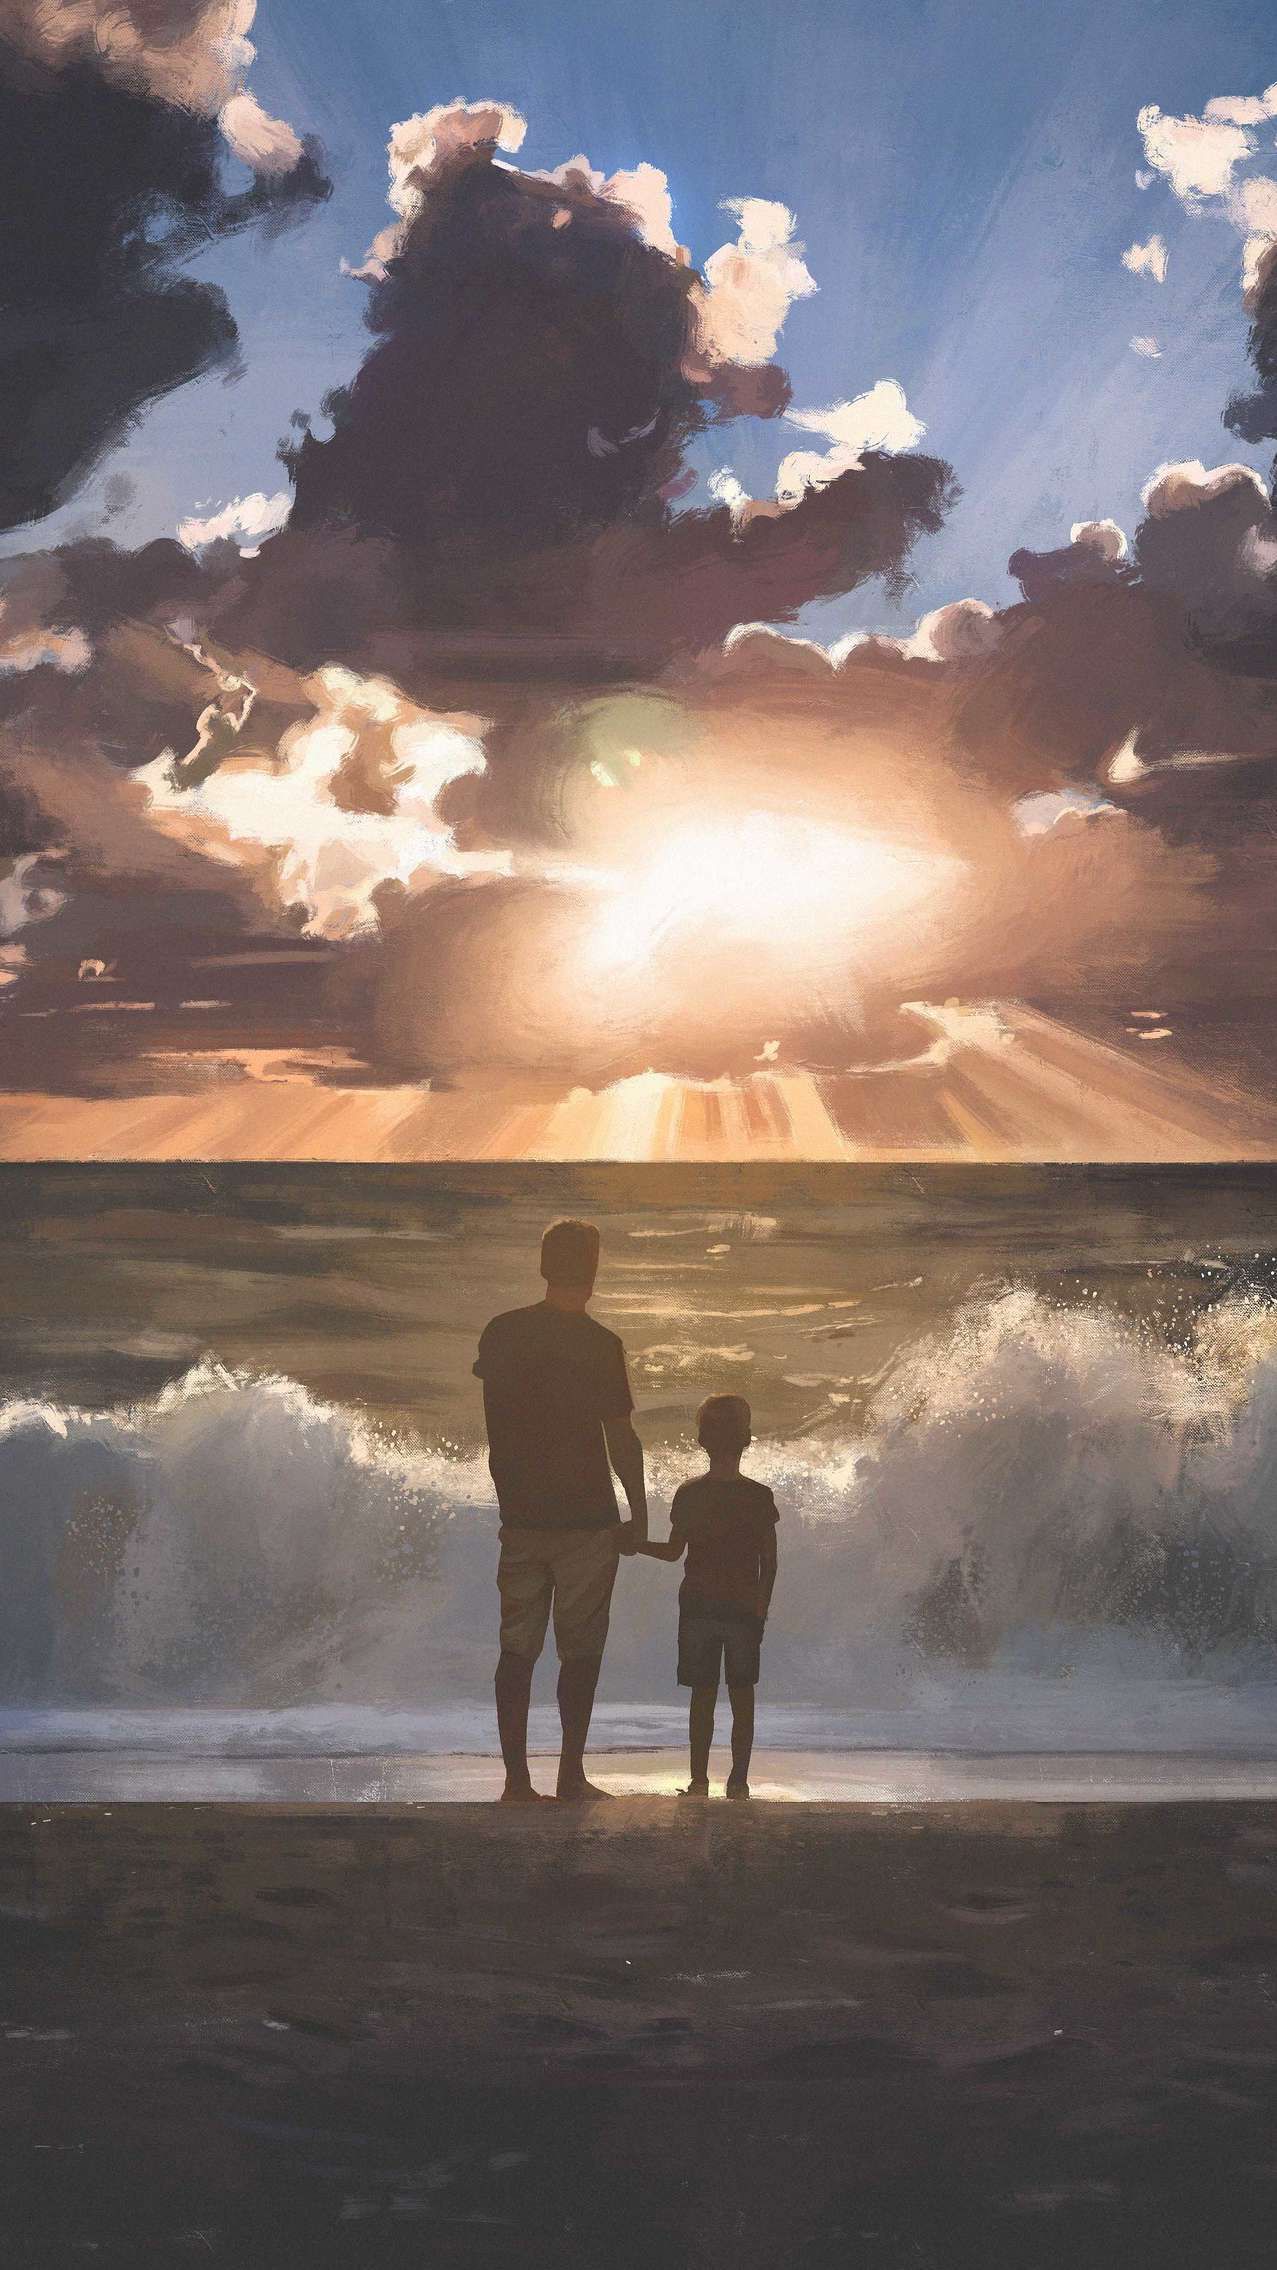 Father and Son iPhone Wallpaper. HD nature wallpaper, Girl iphone wallpaper, Best photo background